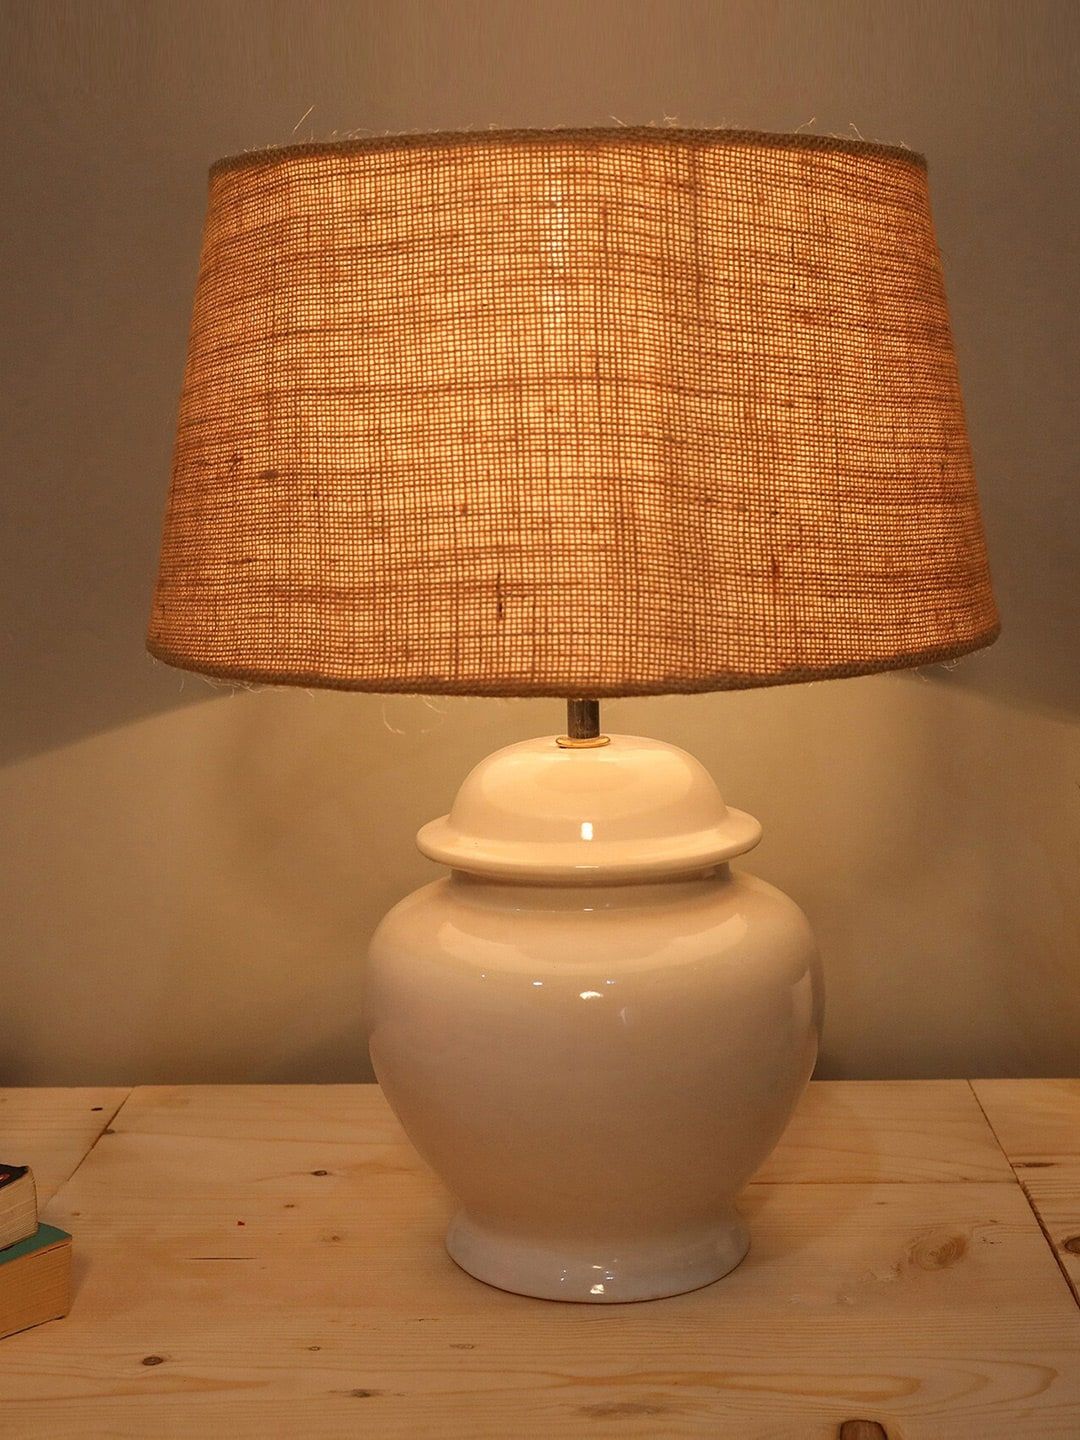 Homesake Beige & White Contemporary Ceramic Pot Shaped Handcrafted Table Lamp with Shade Price in India